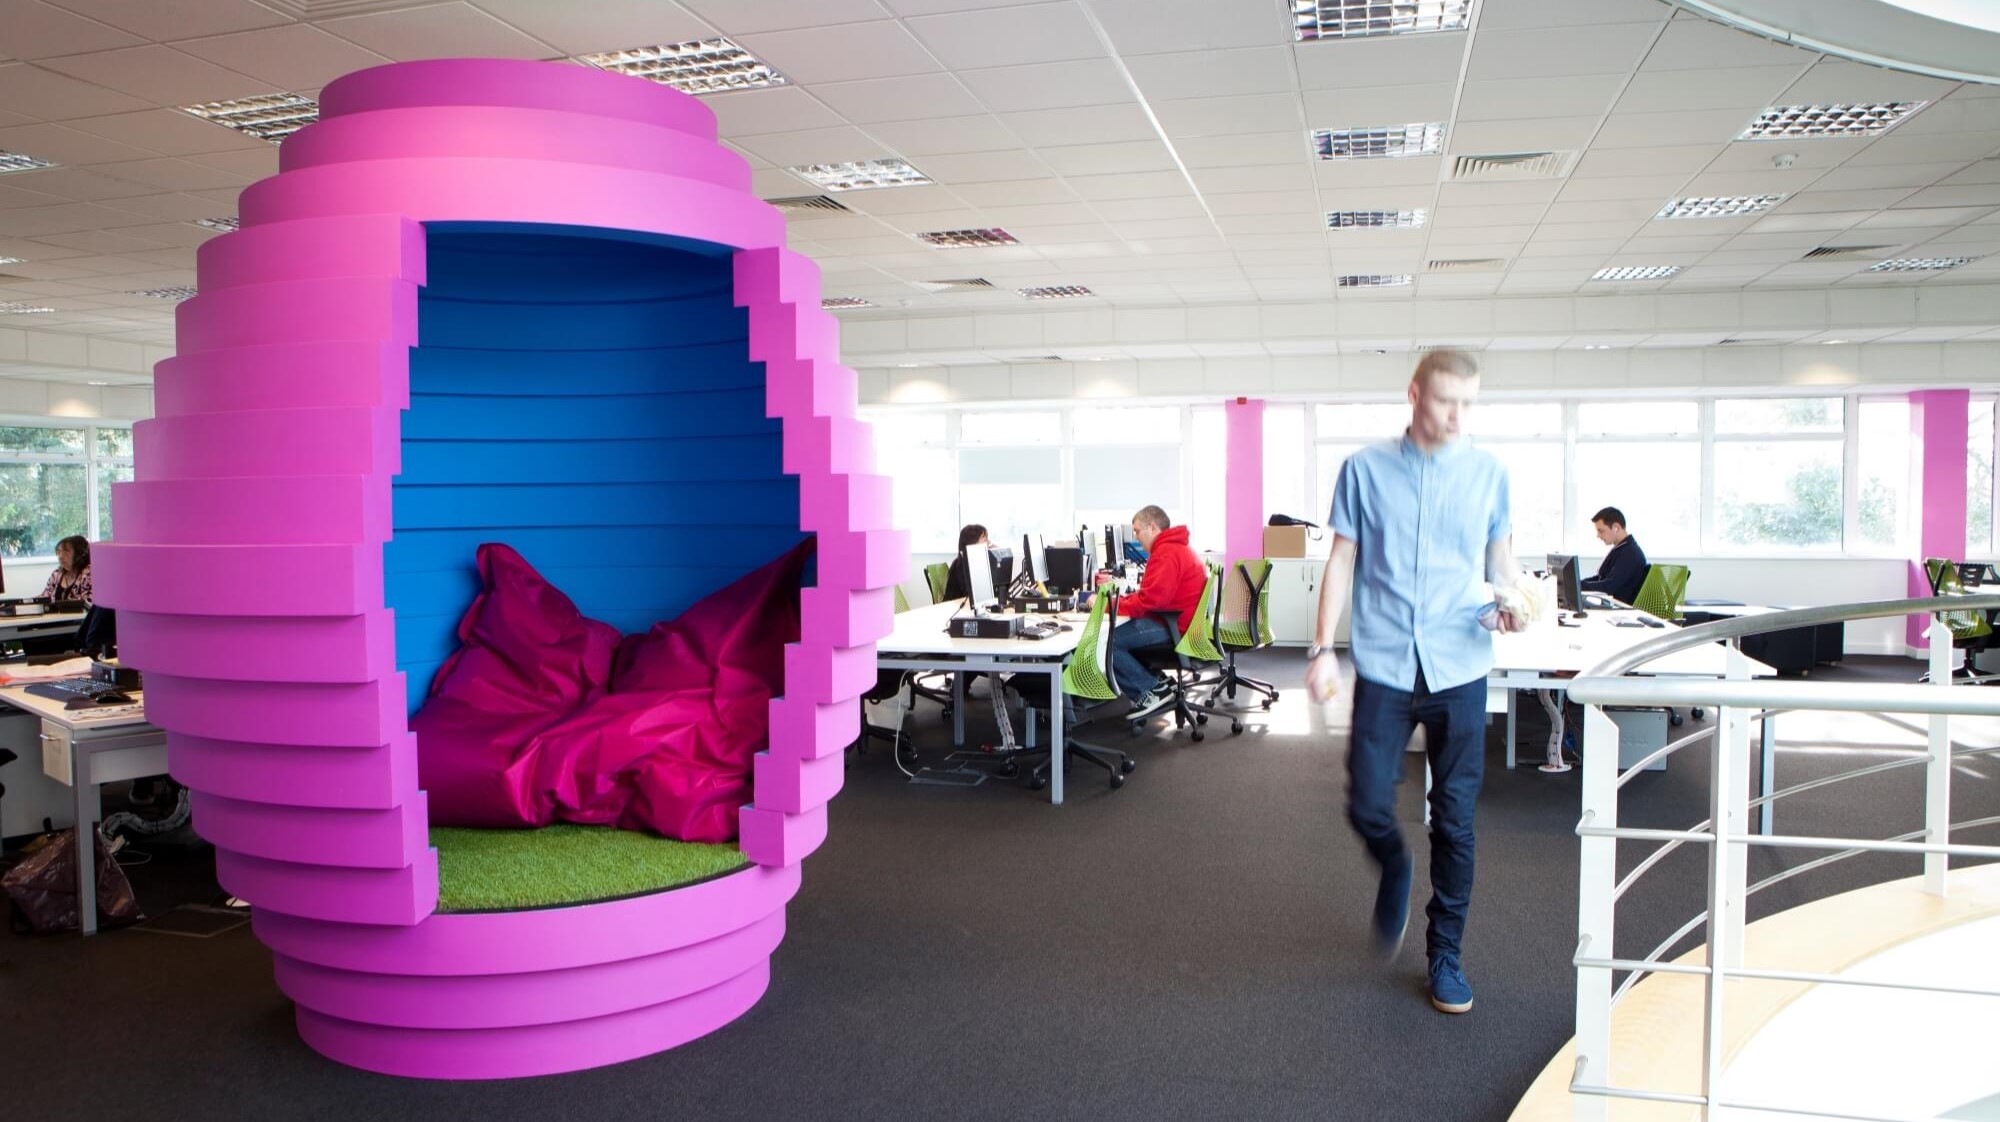 Bespoke Pod For Meetings Or Quiet Work